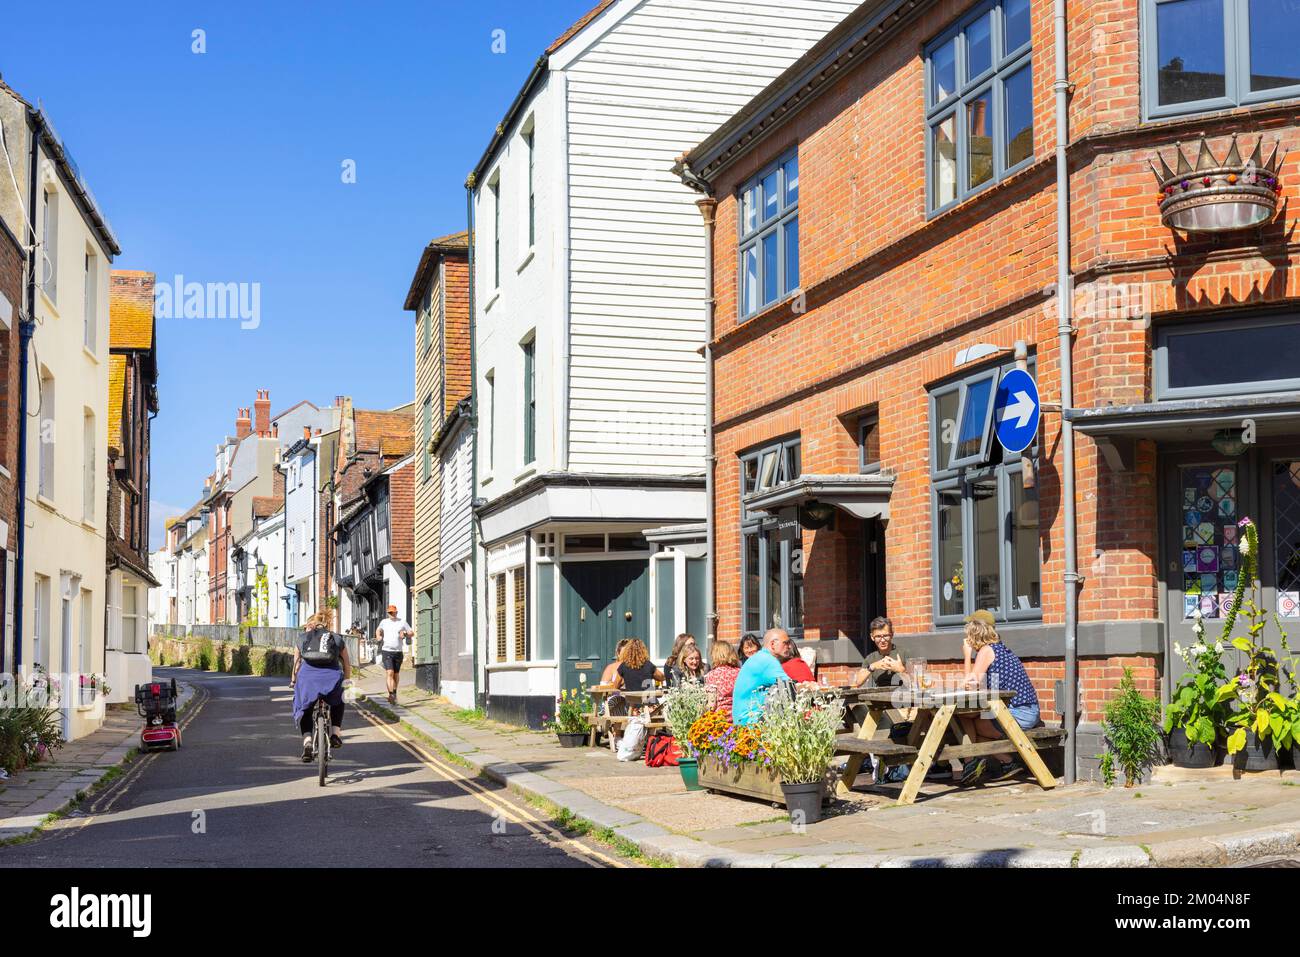 Hastings Old Town All Saints Street People sedette fuori dal pub The Crown Public House Hastings East Sussex Inghilterra UK GB Europe Foto Stock